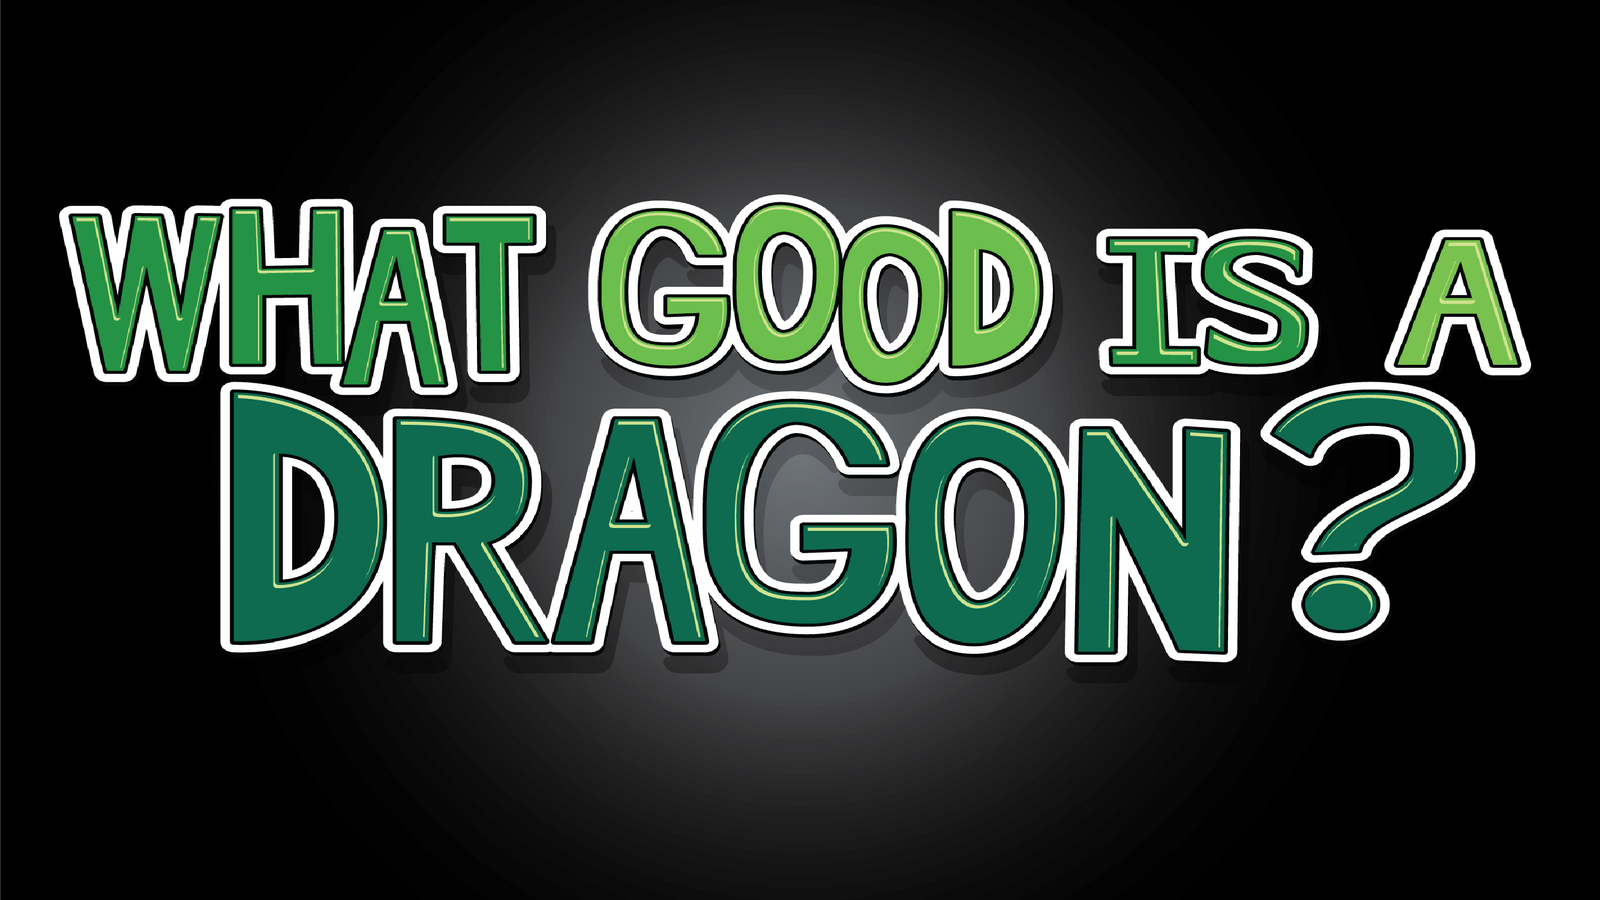 What Good Is A Dragon?